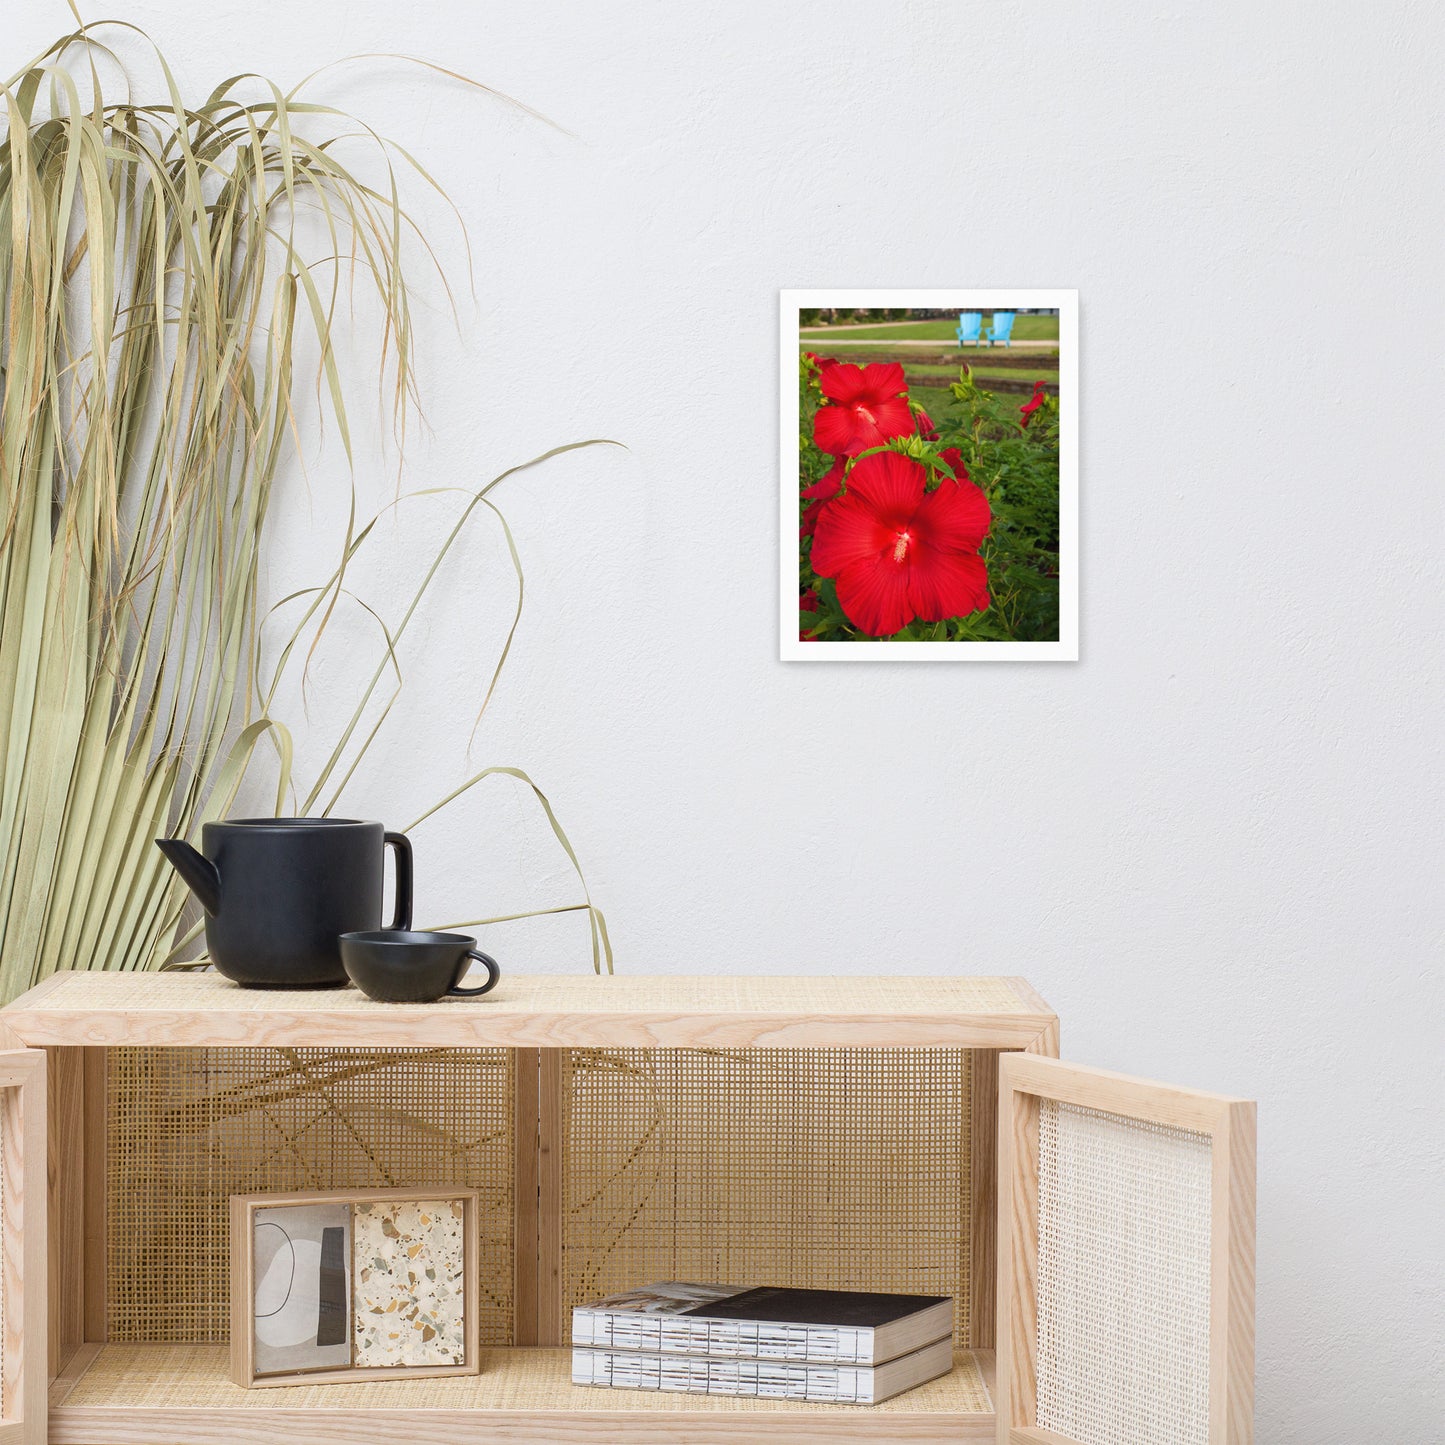 The Riverfront 2 Floral Nature Photo Framed Wall Art Print